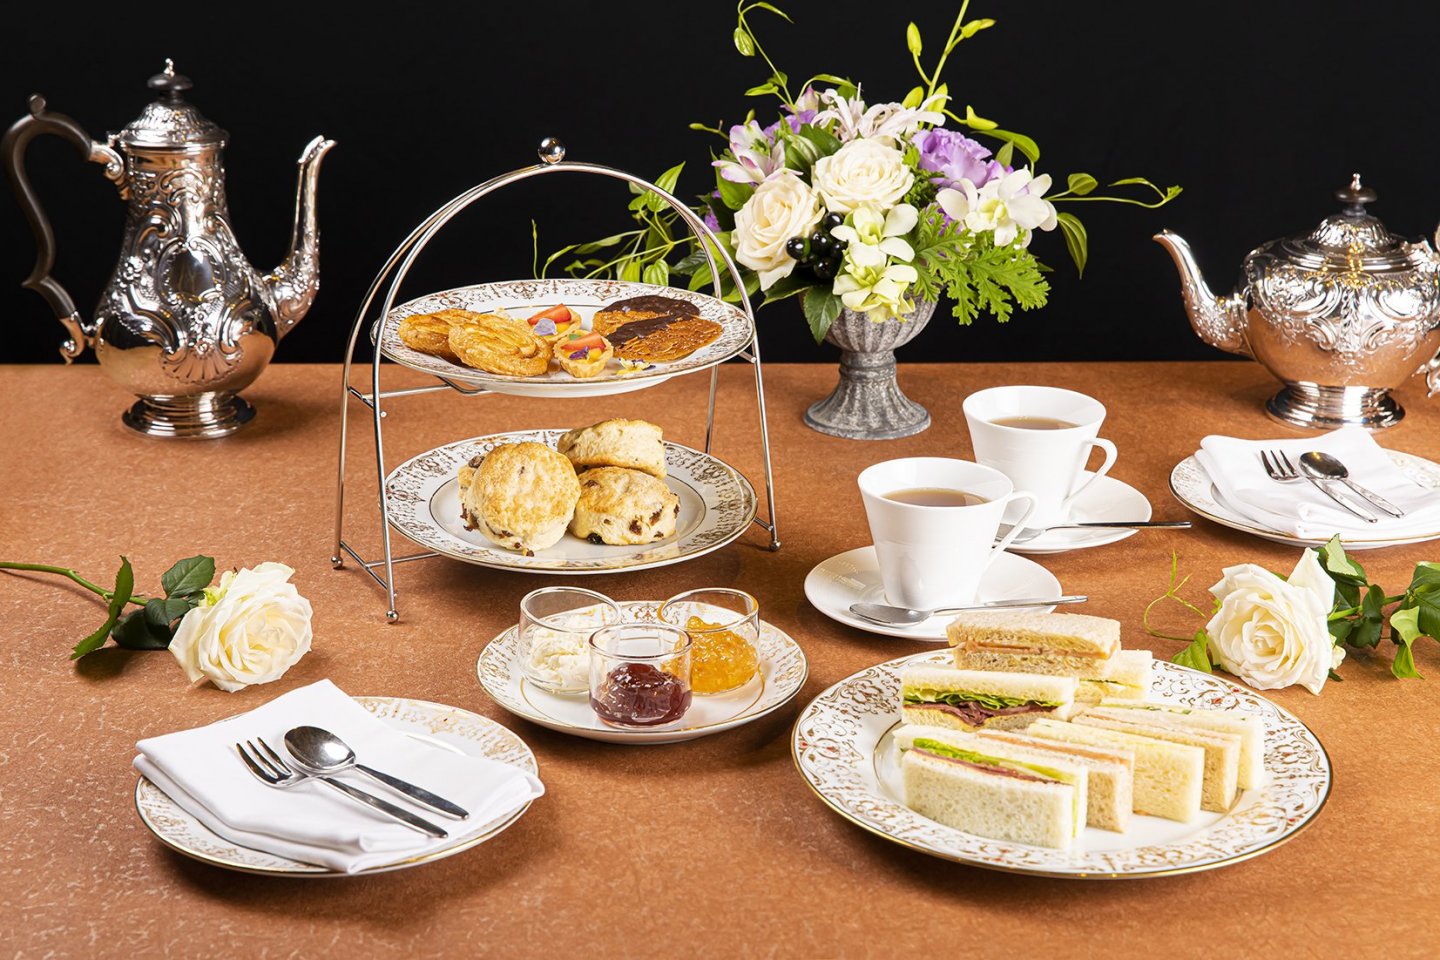 Downton Abbey Afternoon Tea 2021 - December Events In Tokyo - Japan Travel